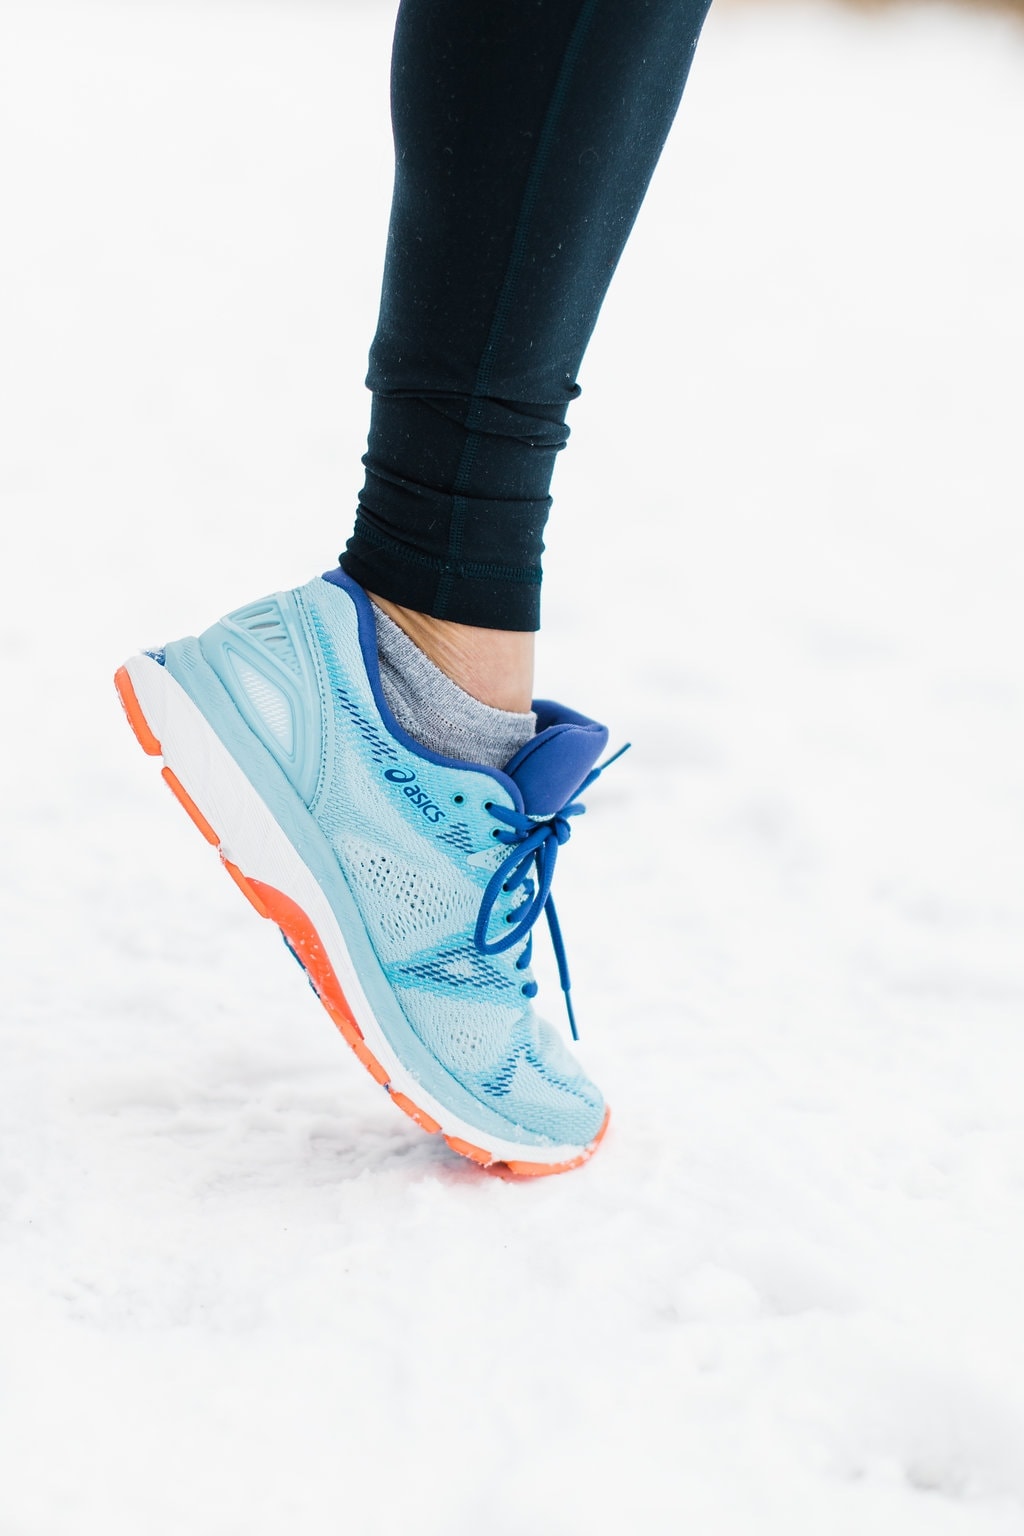 My Running Story + Why My Mindset About Running Needs to Change with the Asics GEL-Nimbus20